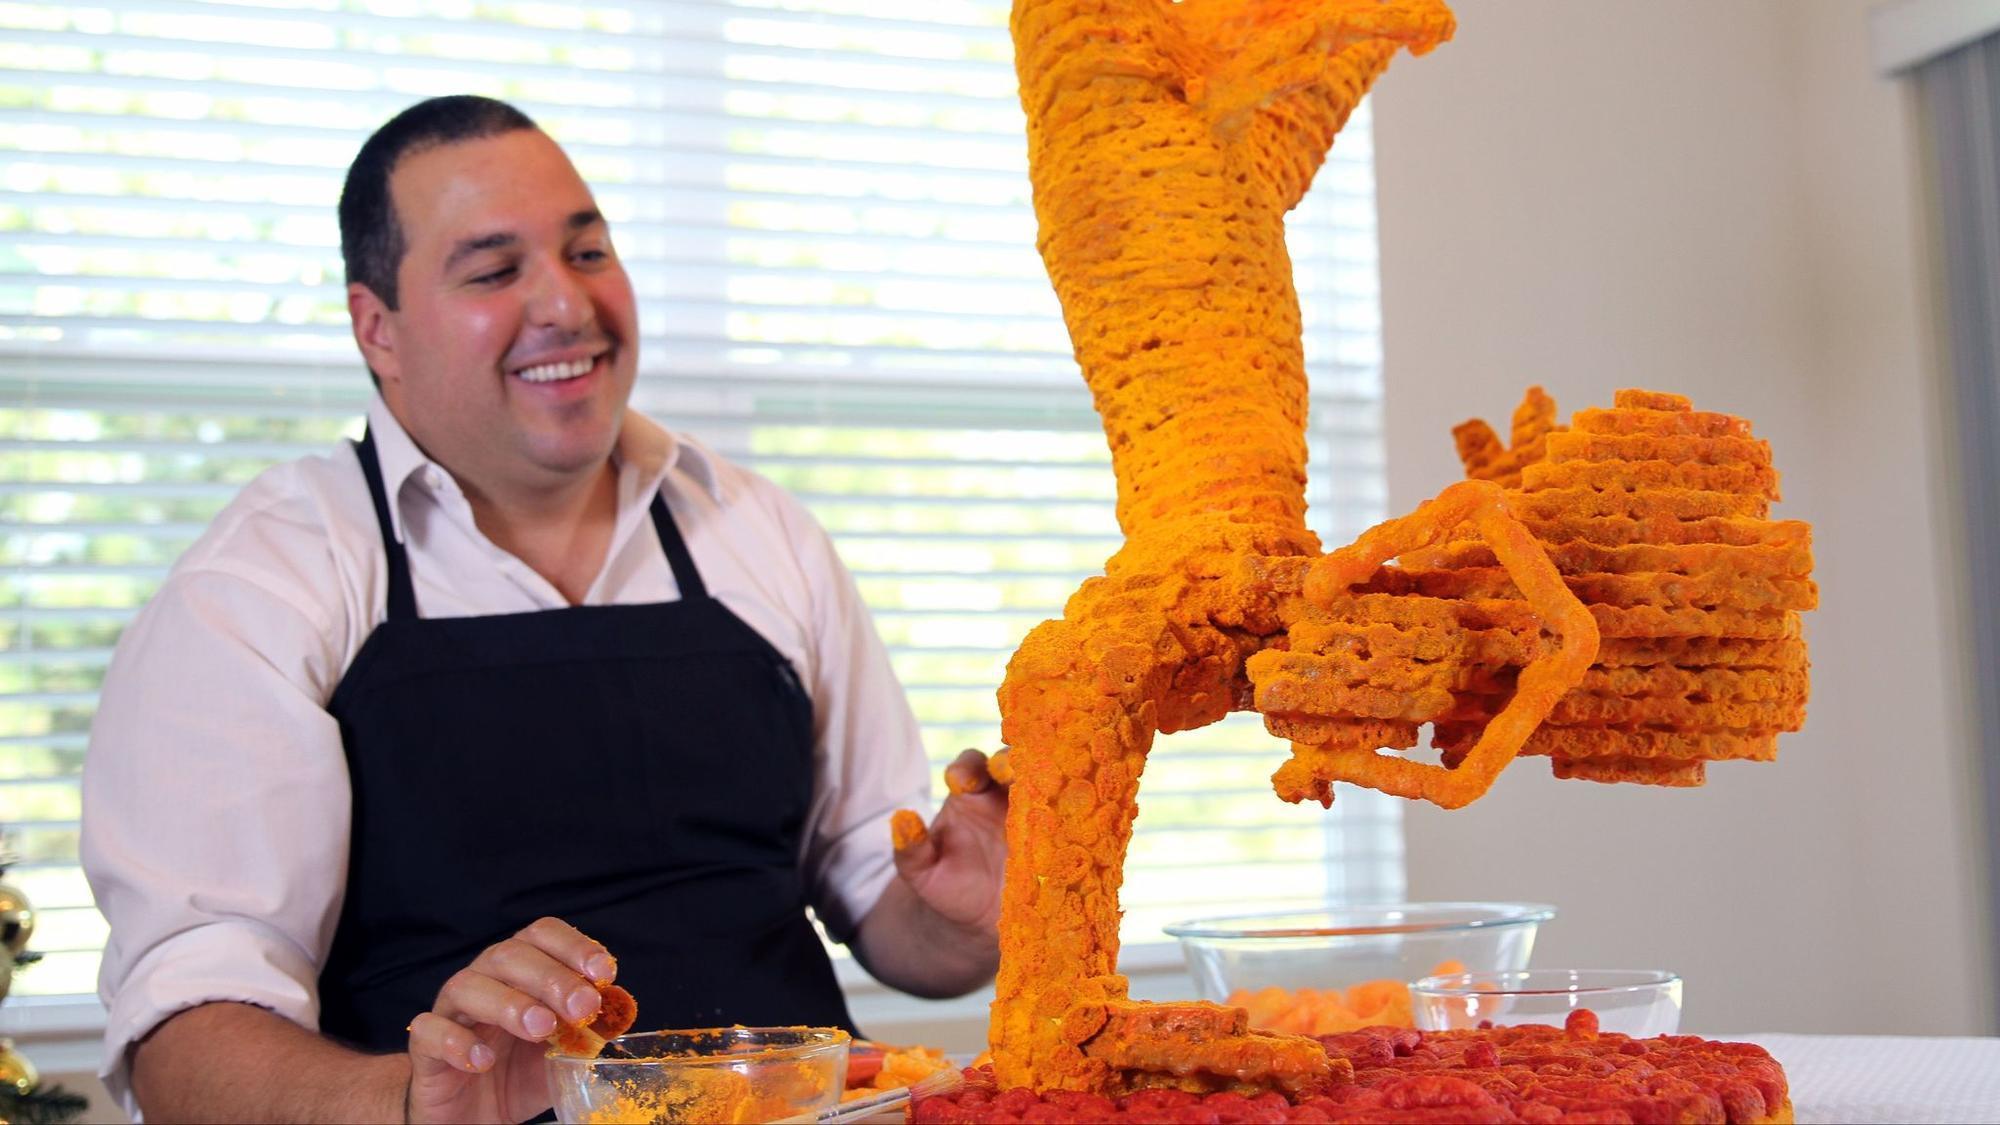 Artist uses thousands of Cheetos to make sculpture - Orlando Sentinel